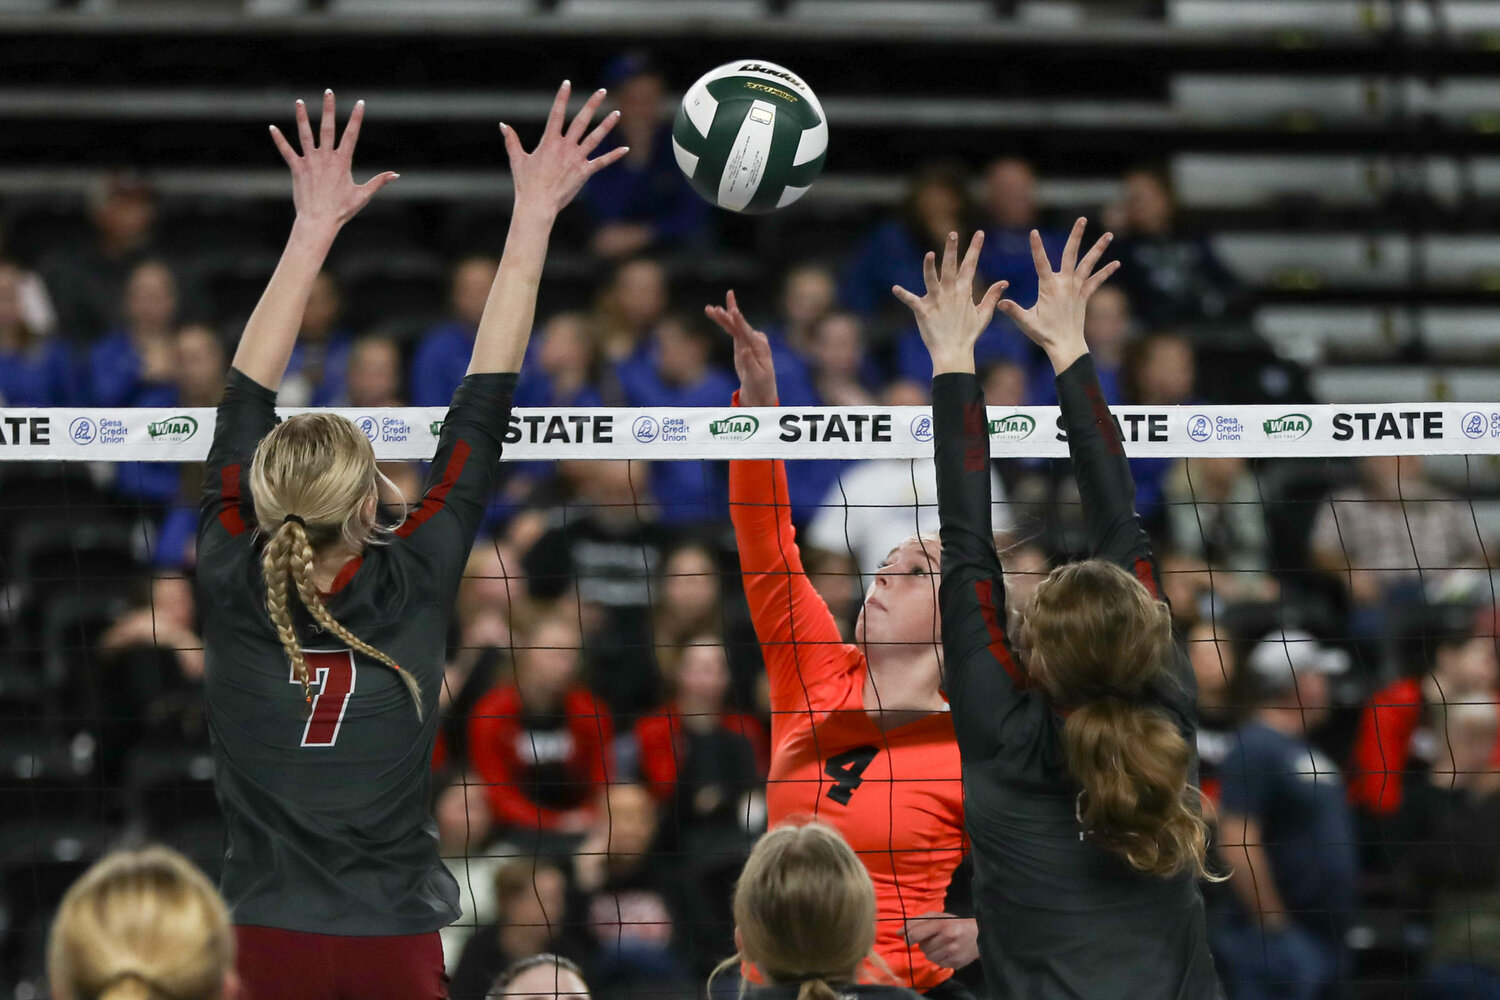 Grace Gall tips the ball over two Okanogan defenders during Napavine's first-round matchup at the state tournament on Nov. 8 in Yakima.